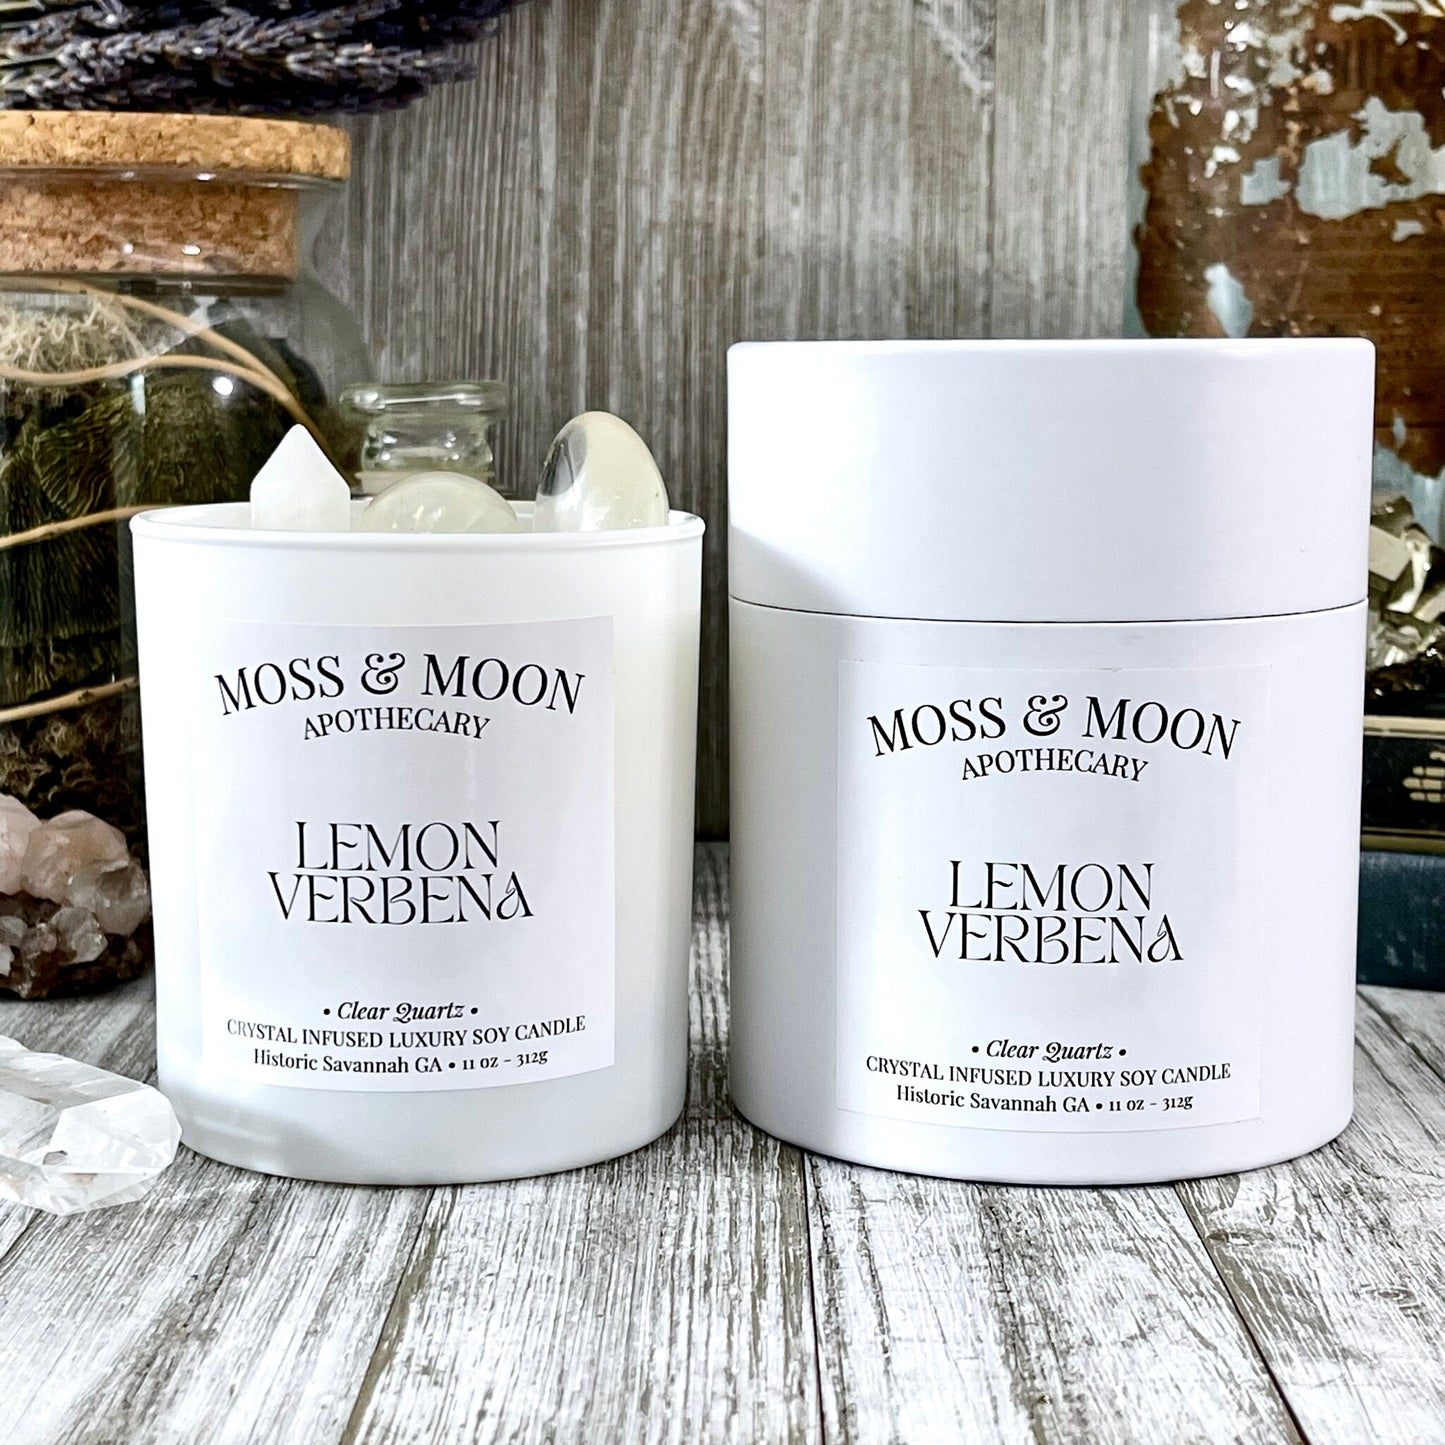 Lemon Verbena Candle with Clear Quartz - Moss & Moon Apothecary Crystal Infused Luxury Soy Candle